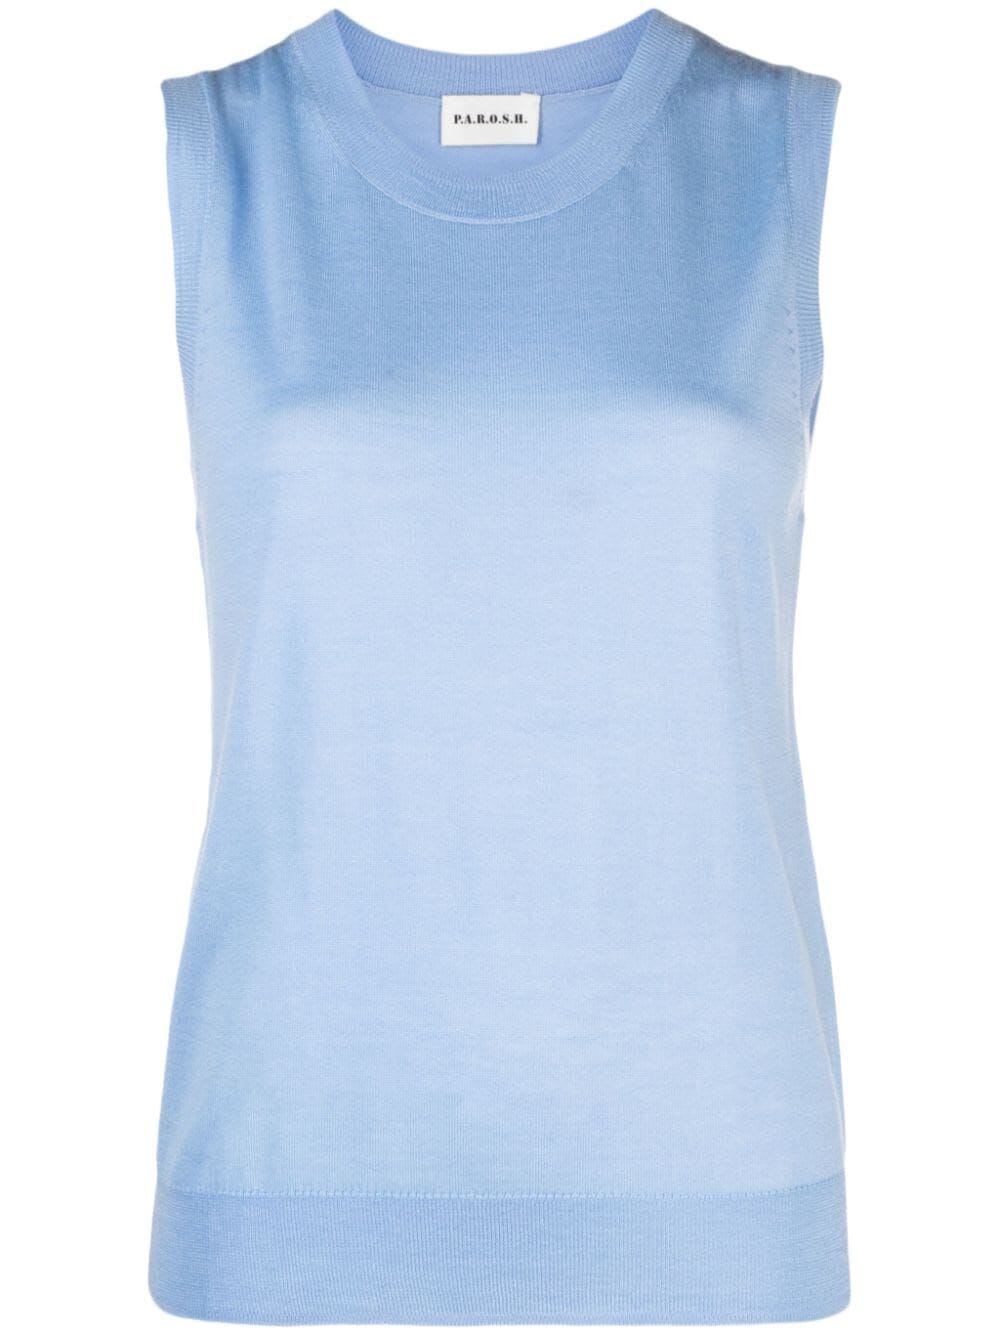 Shop P.a.r.o.s.h Sleeveless Crew Neck Sweater In Light Blue Dust